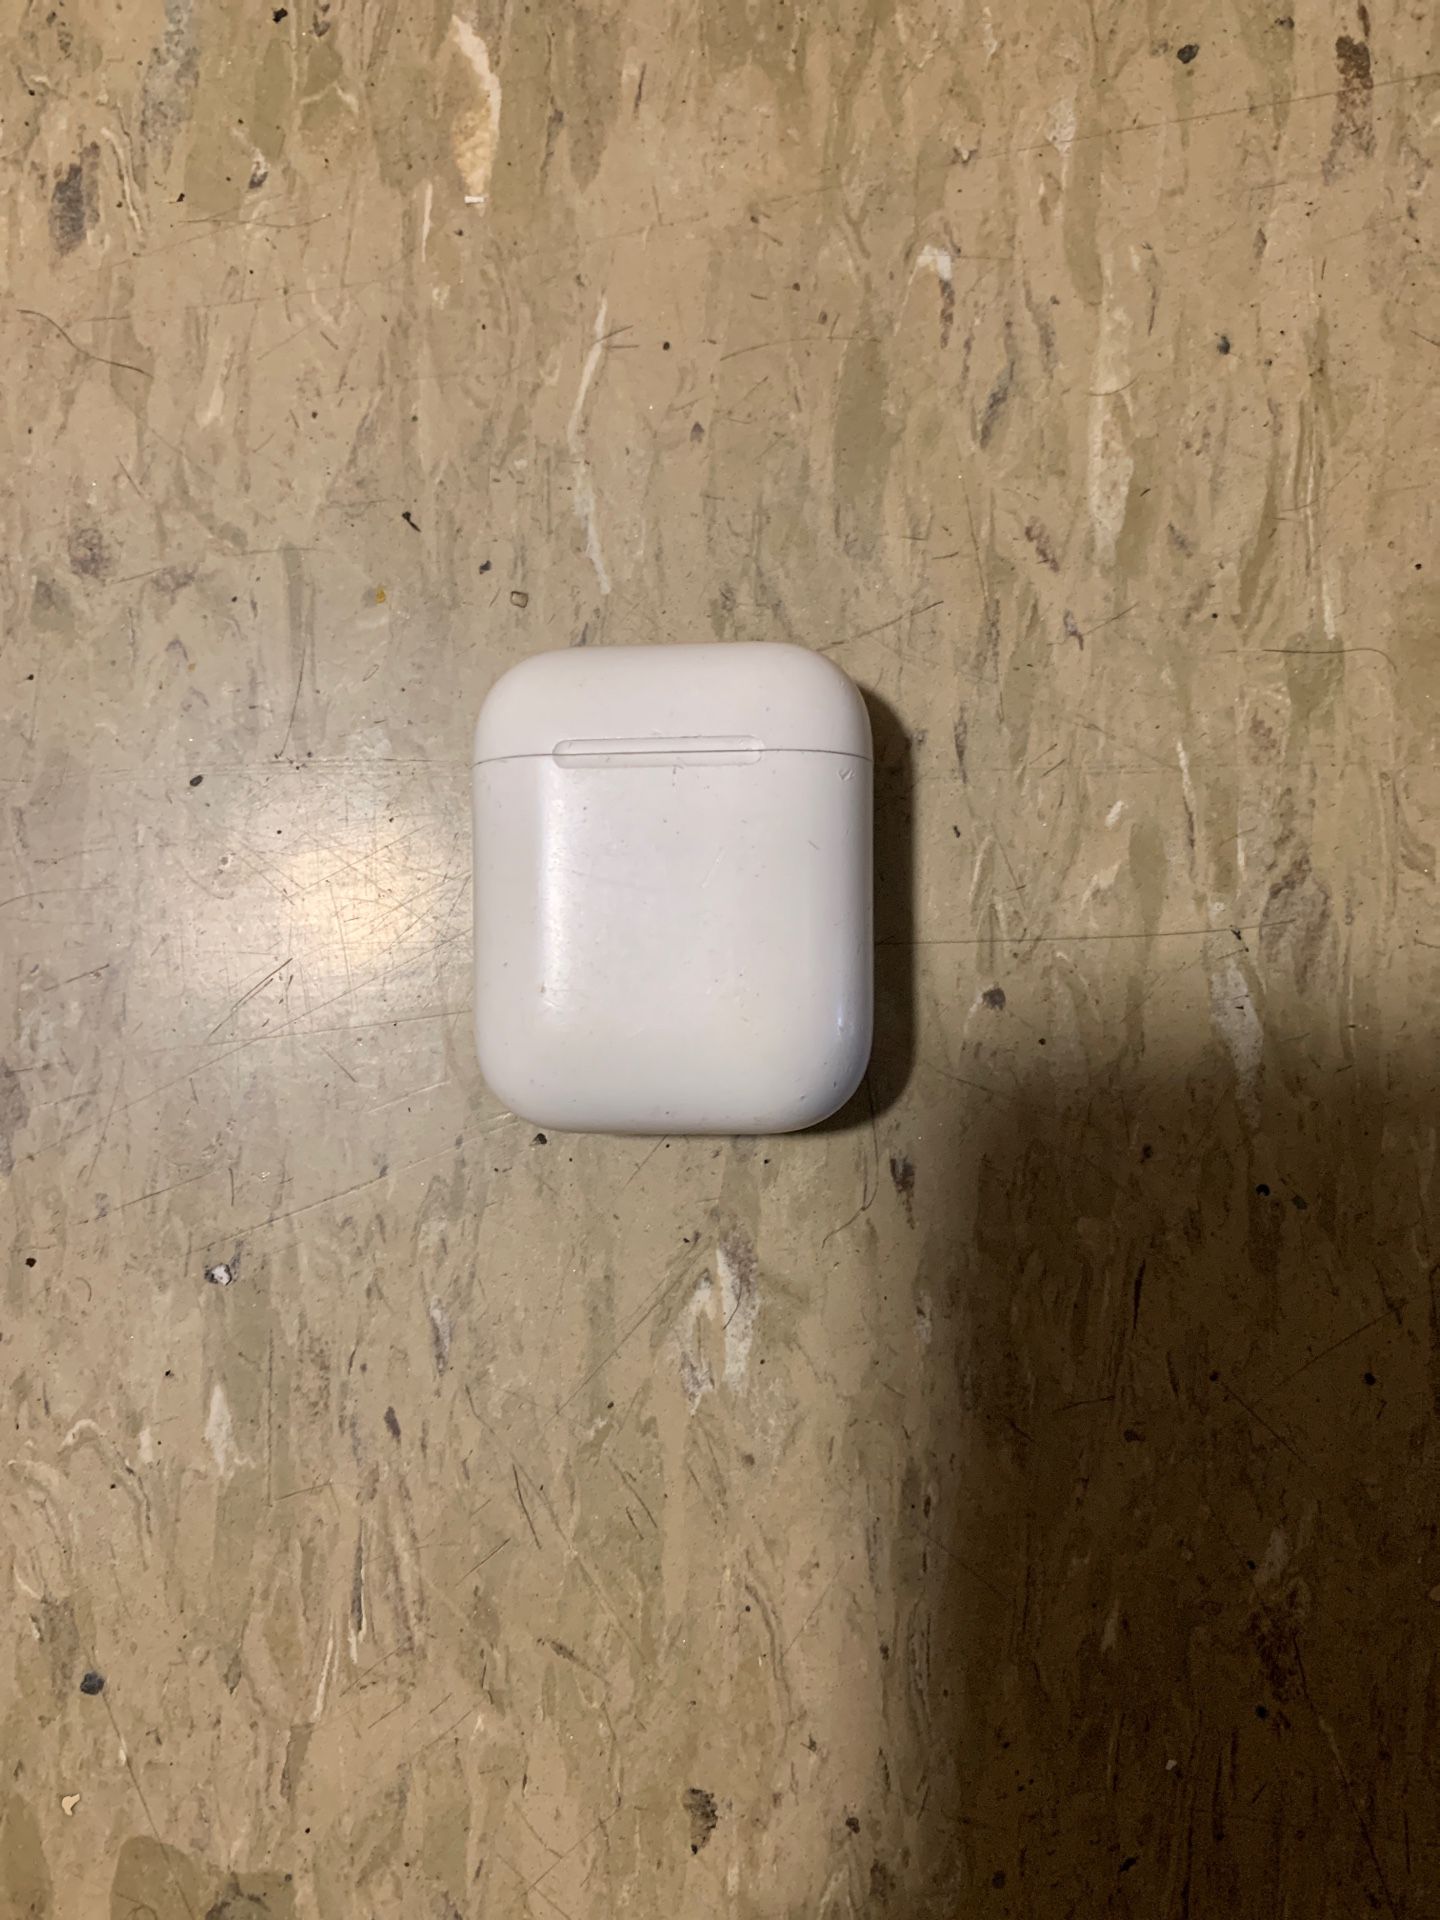 Apple AirPods